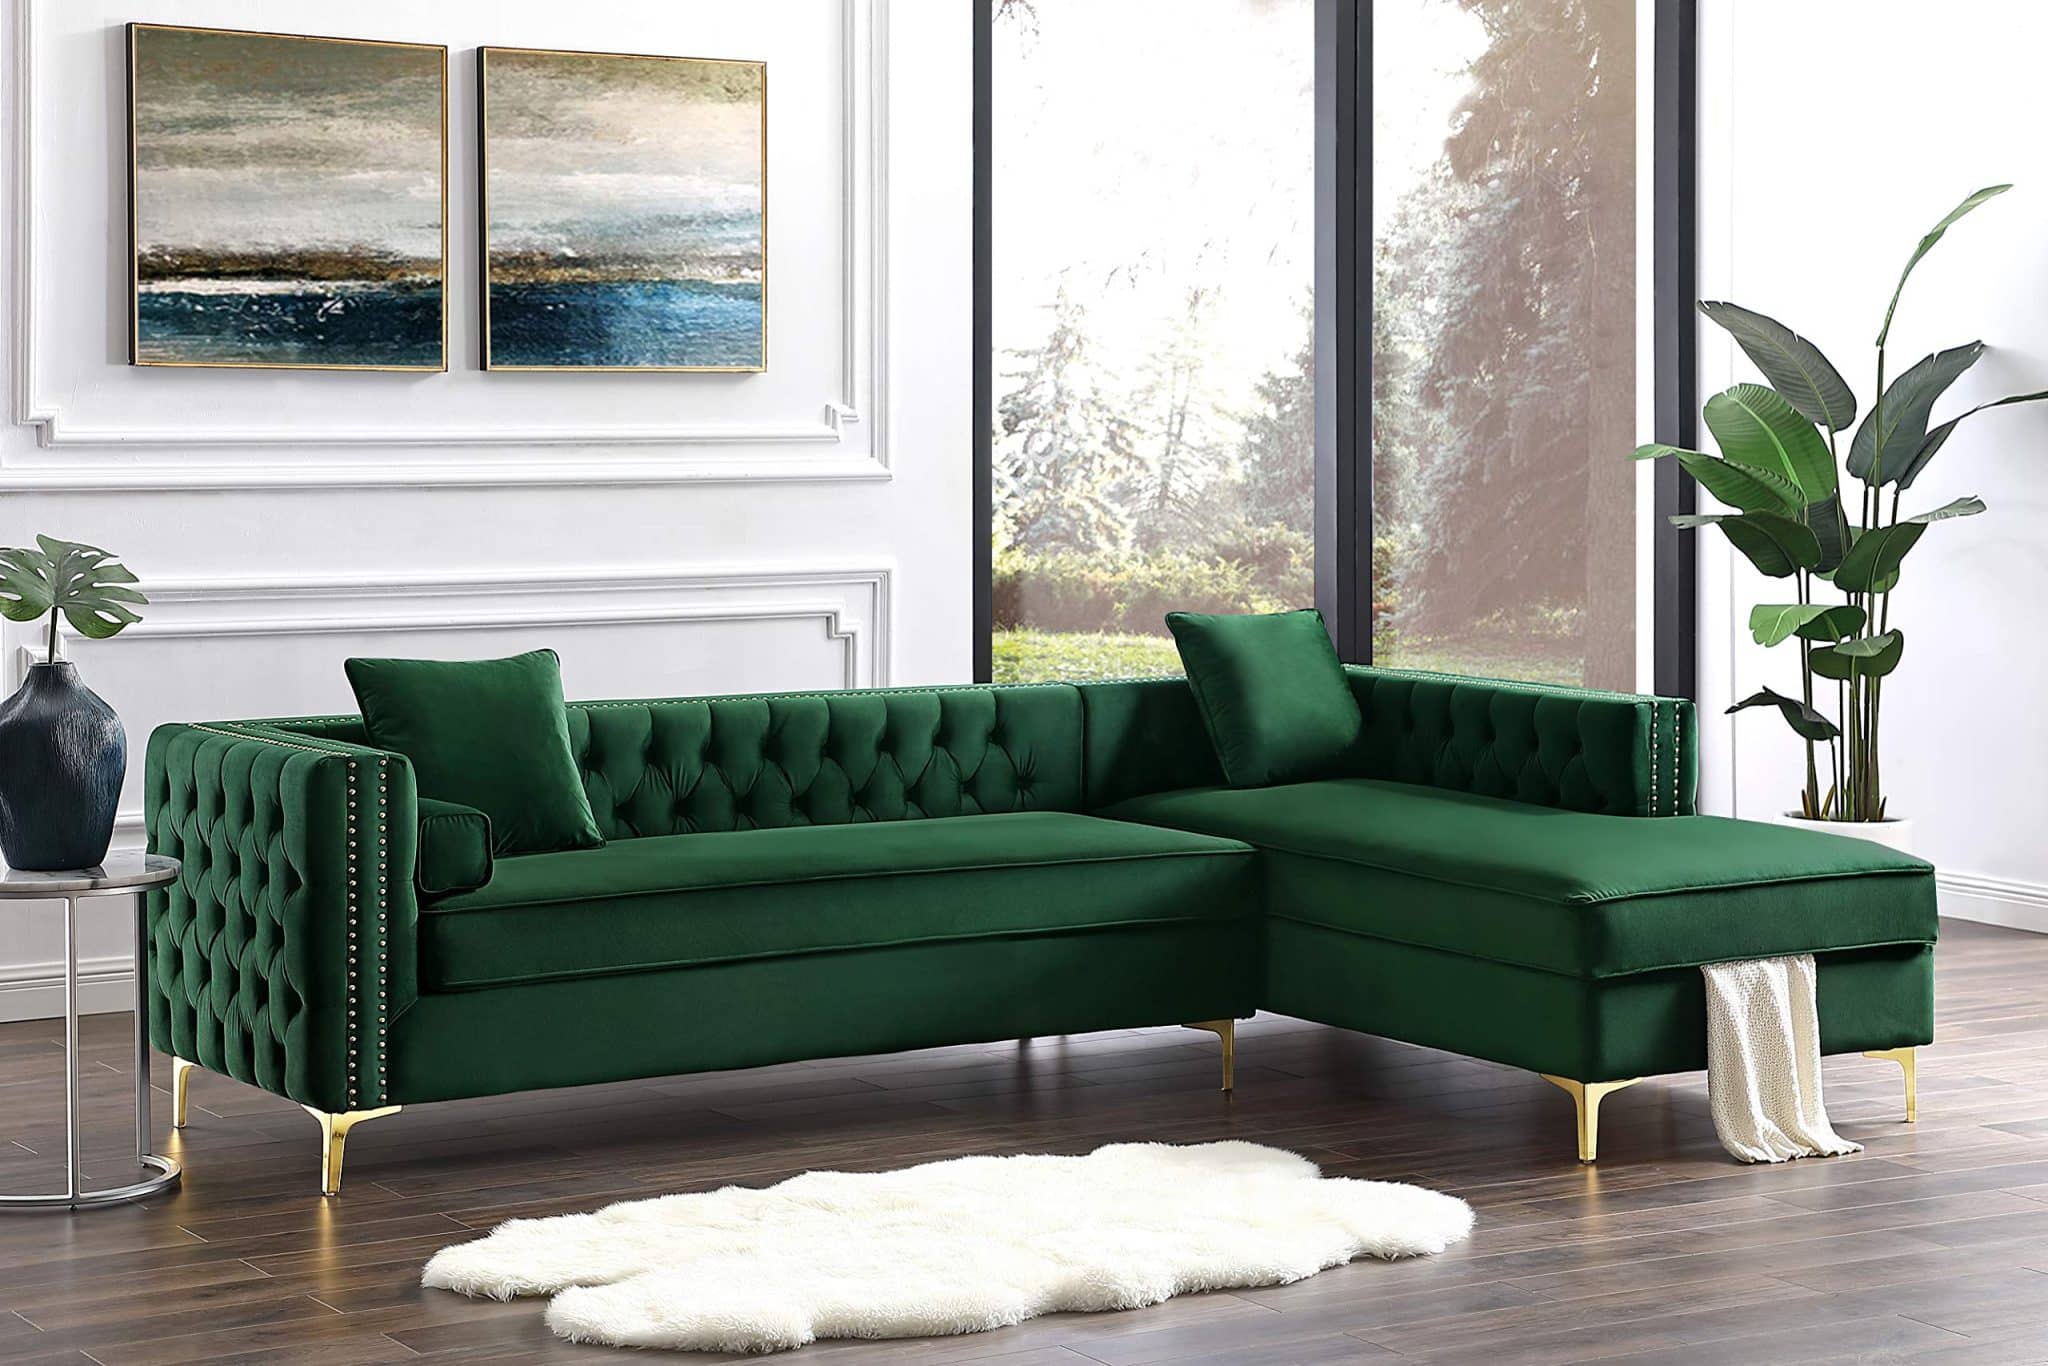 15 Best Green Sectional Sofas to Brighten Up Your Living Room